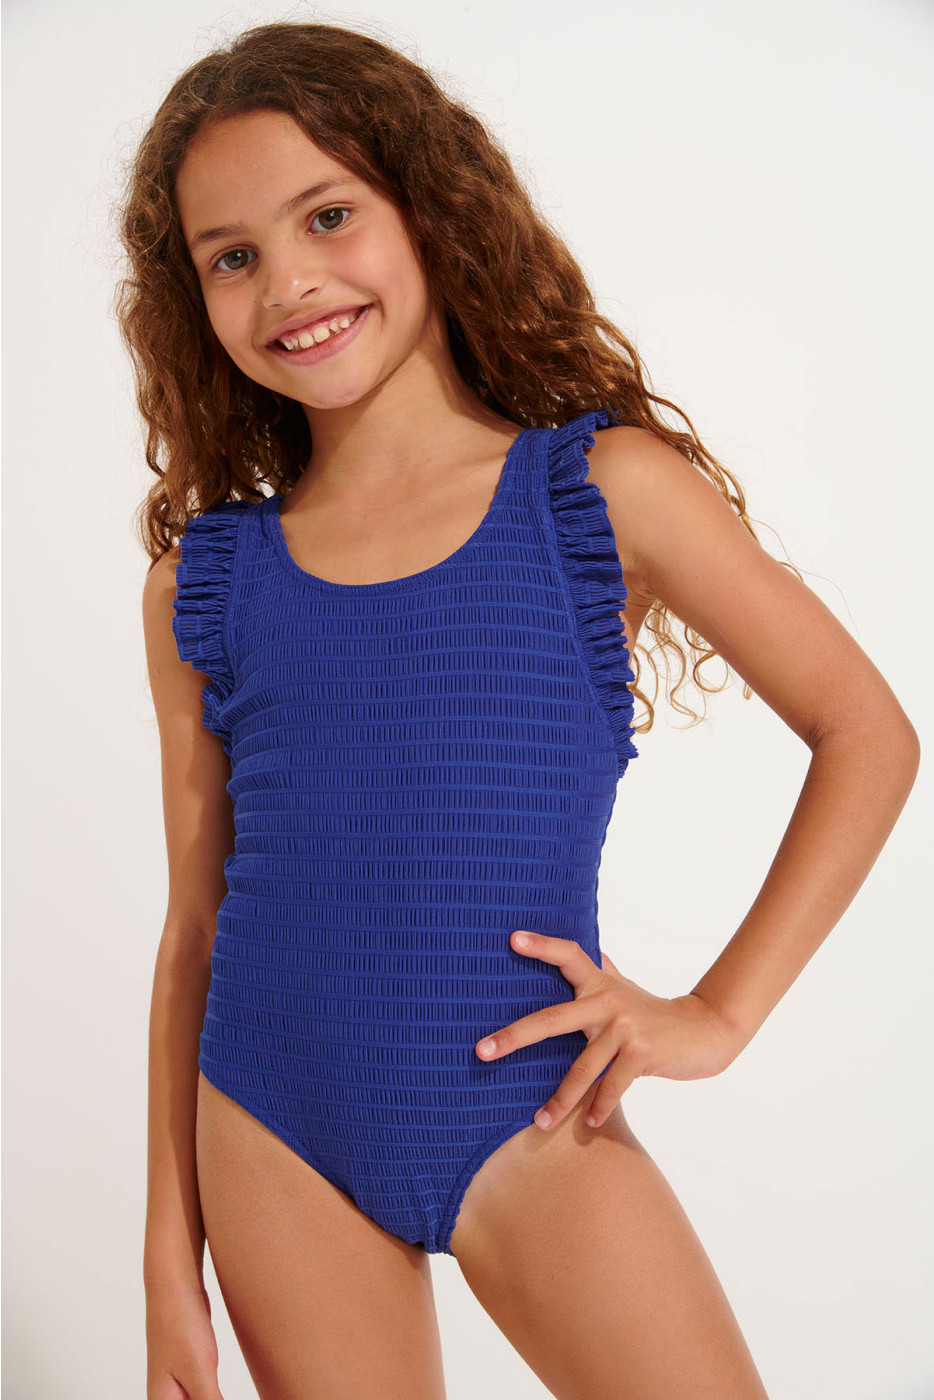 Girls' TUNES GROOVE blue shirred swimsuit